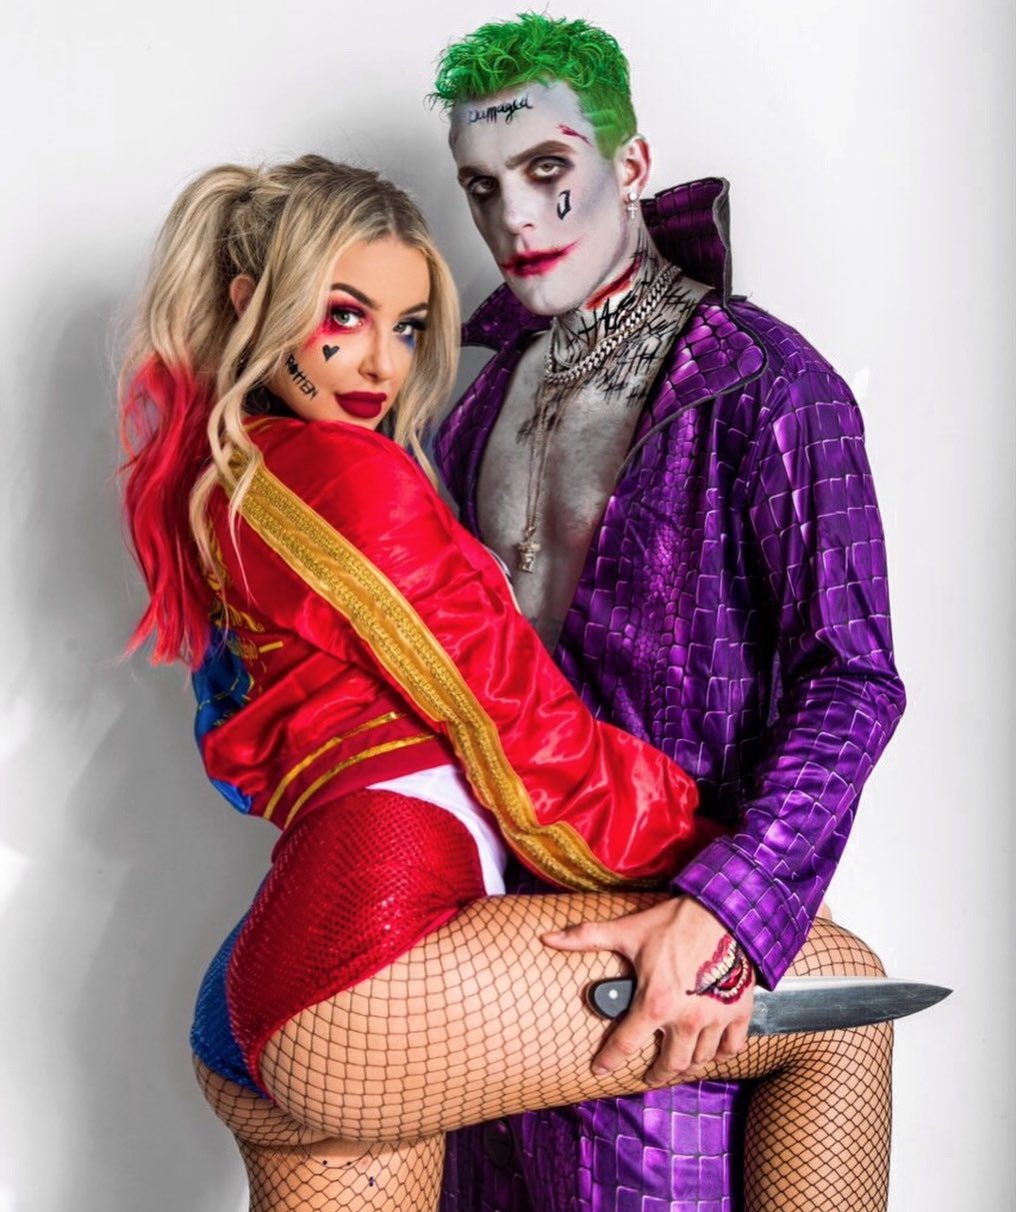 Tana Mongeau Halloween costume blond girl in red costume with a boy with green hair